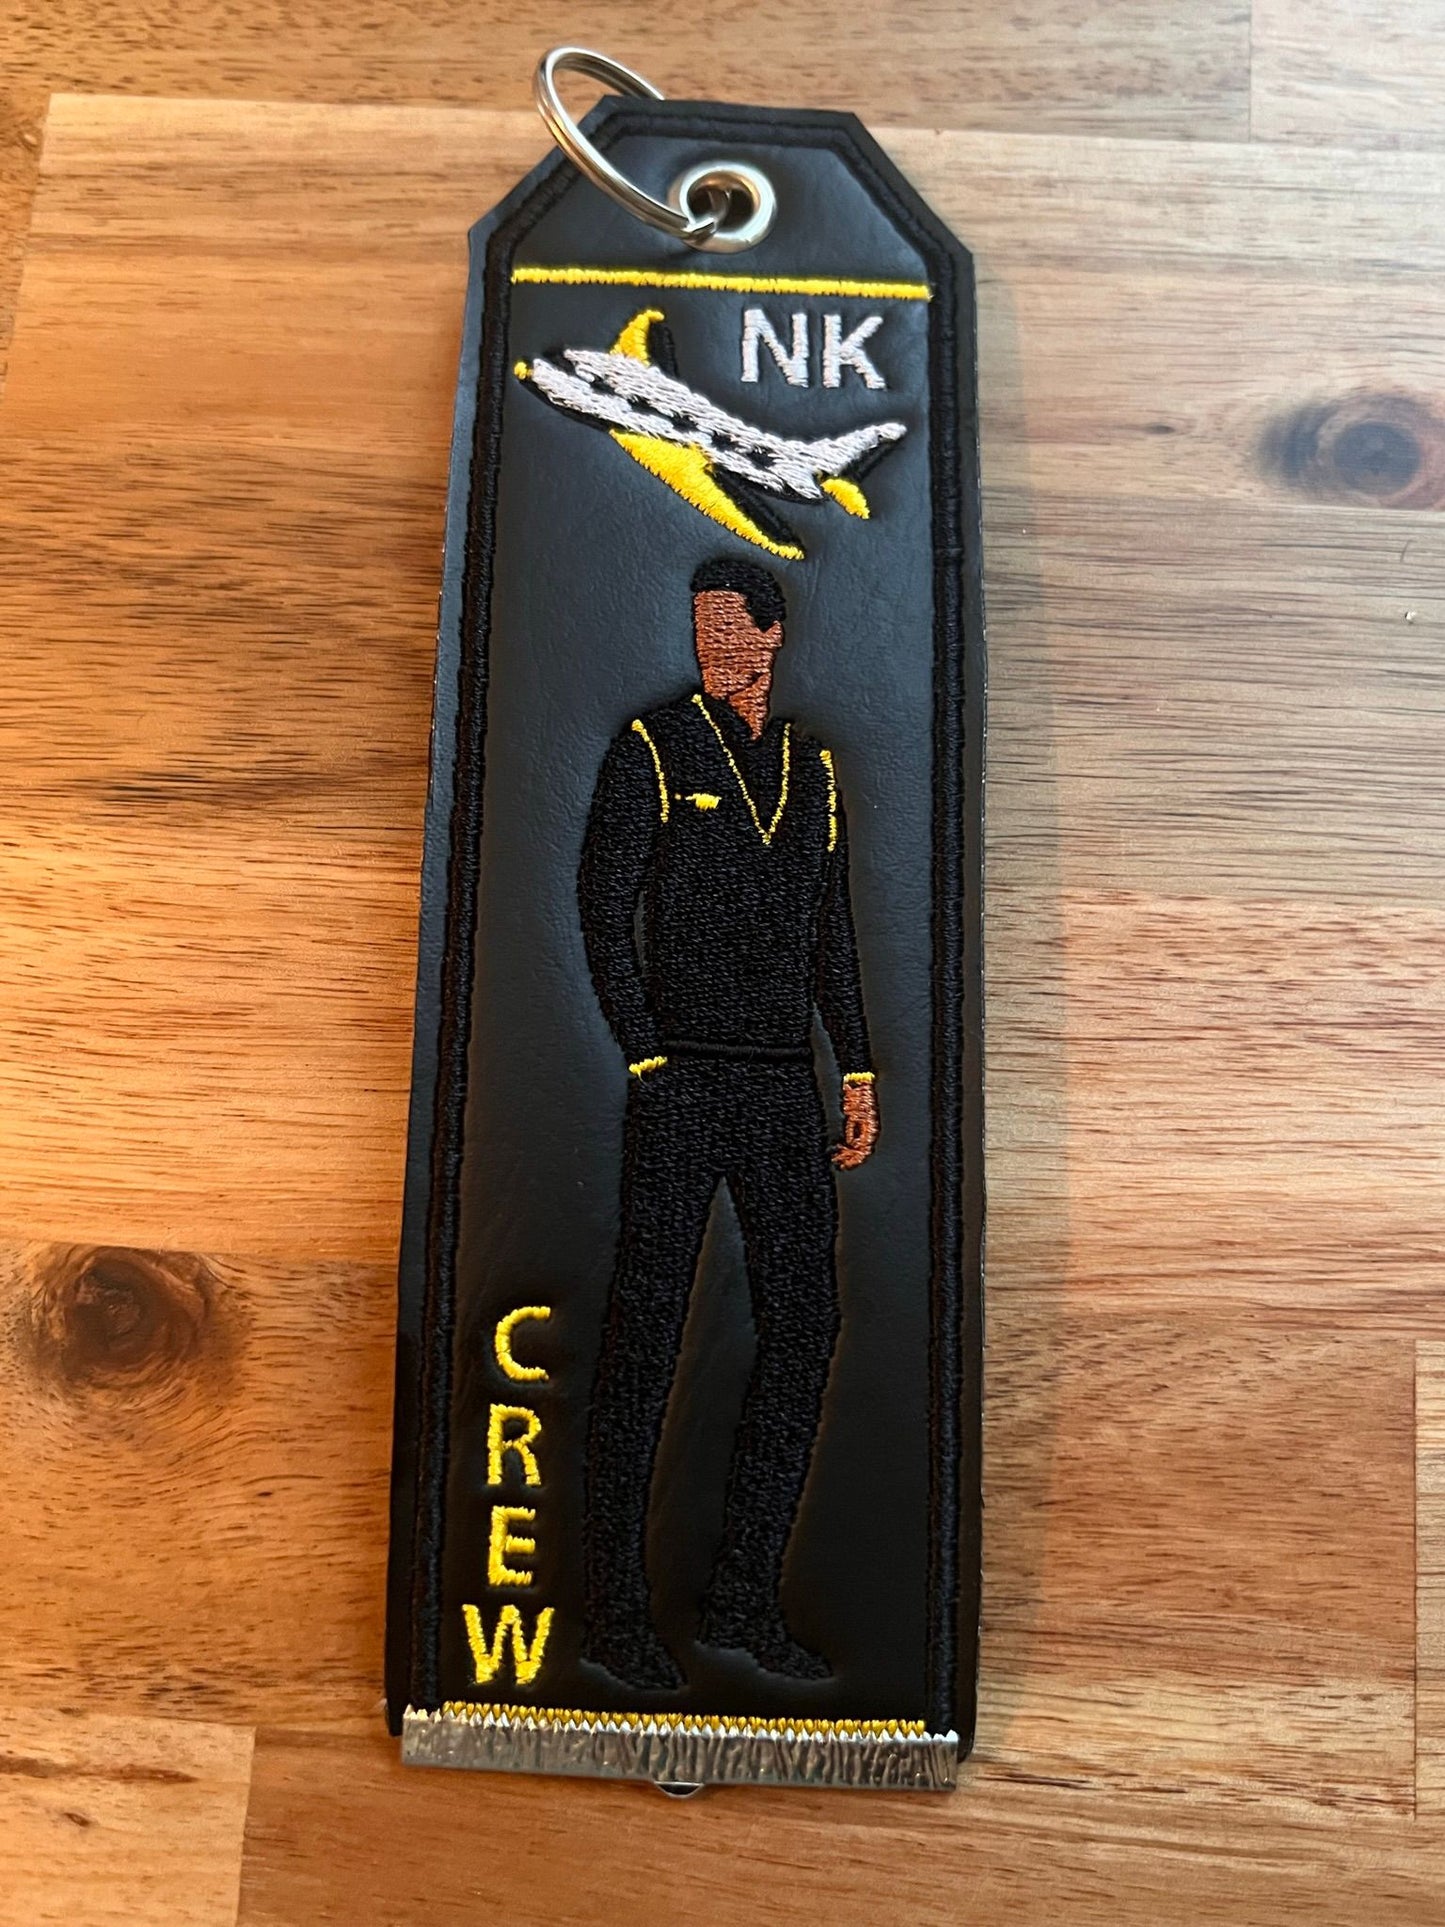 NK FA Crew - Male AS IS